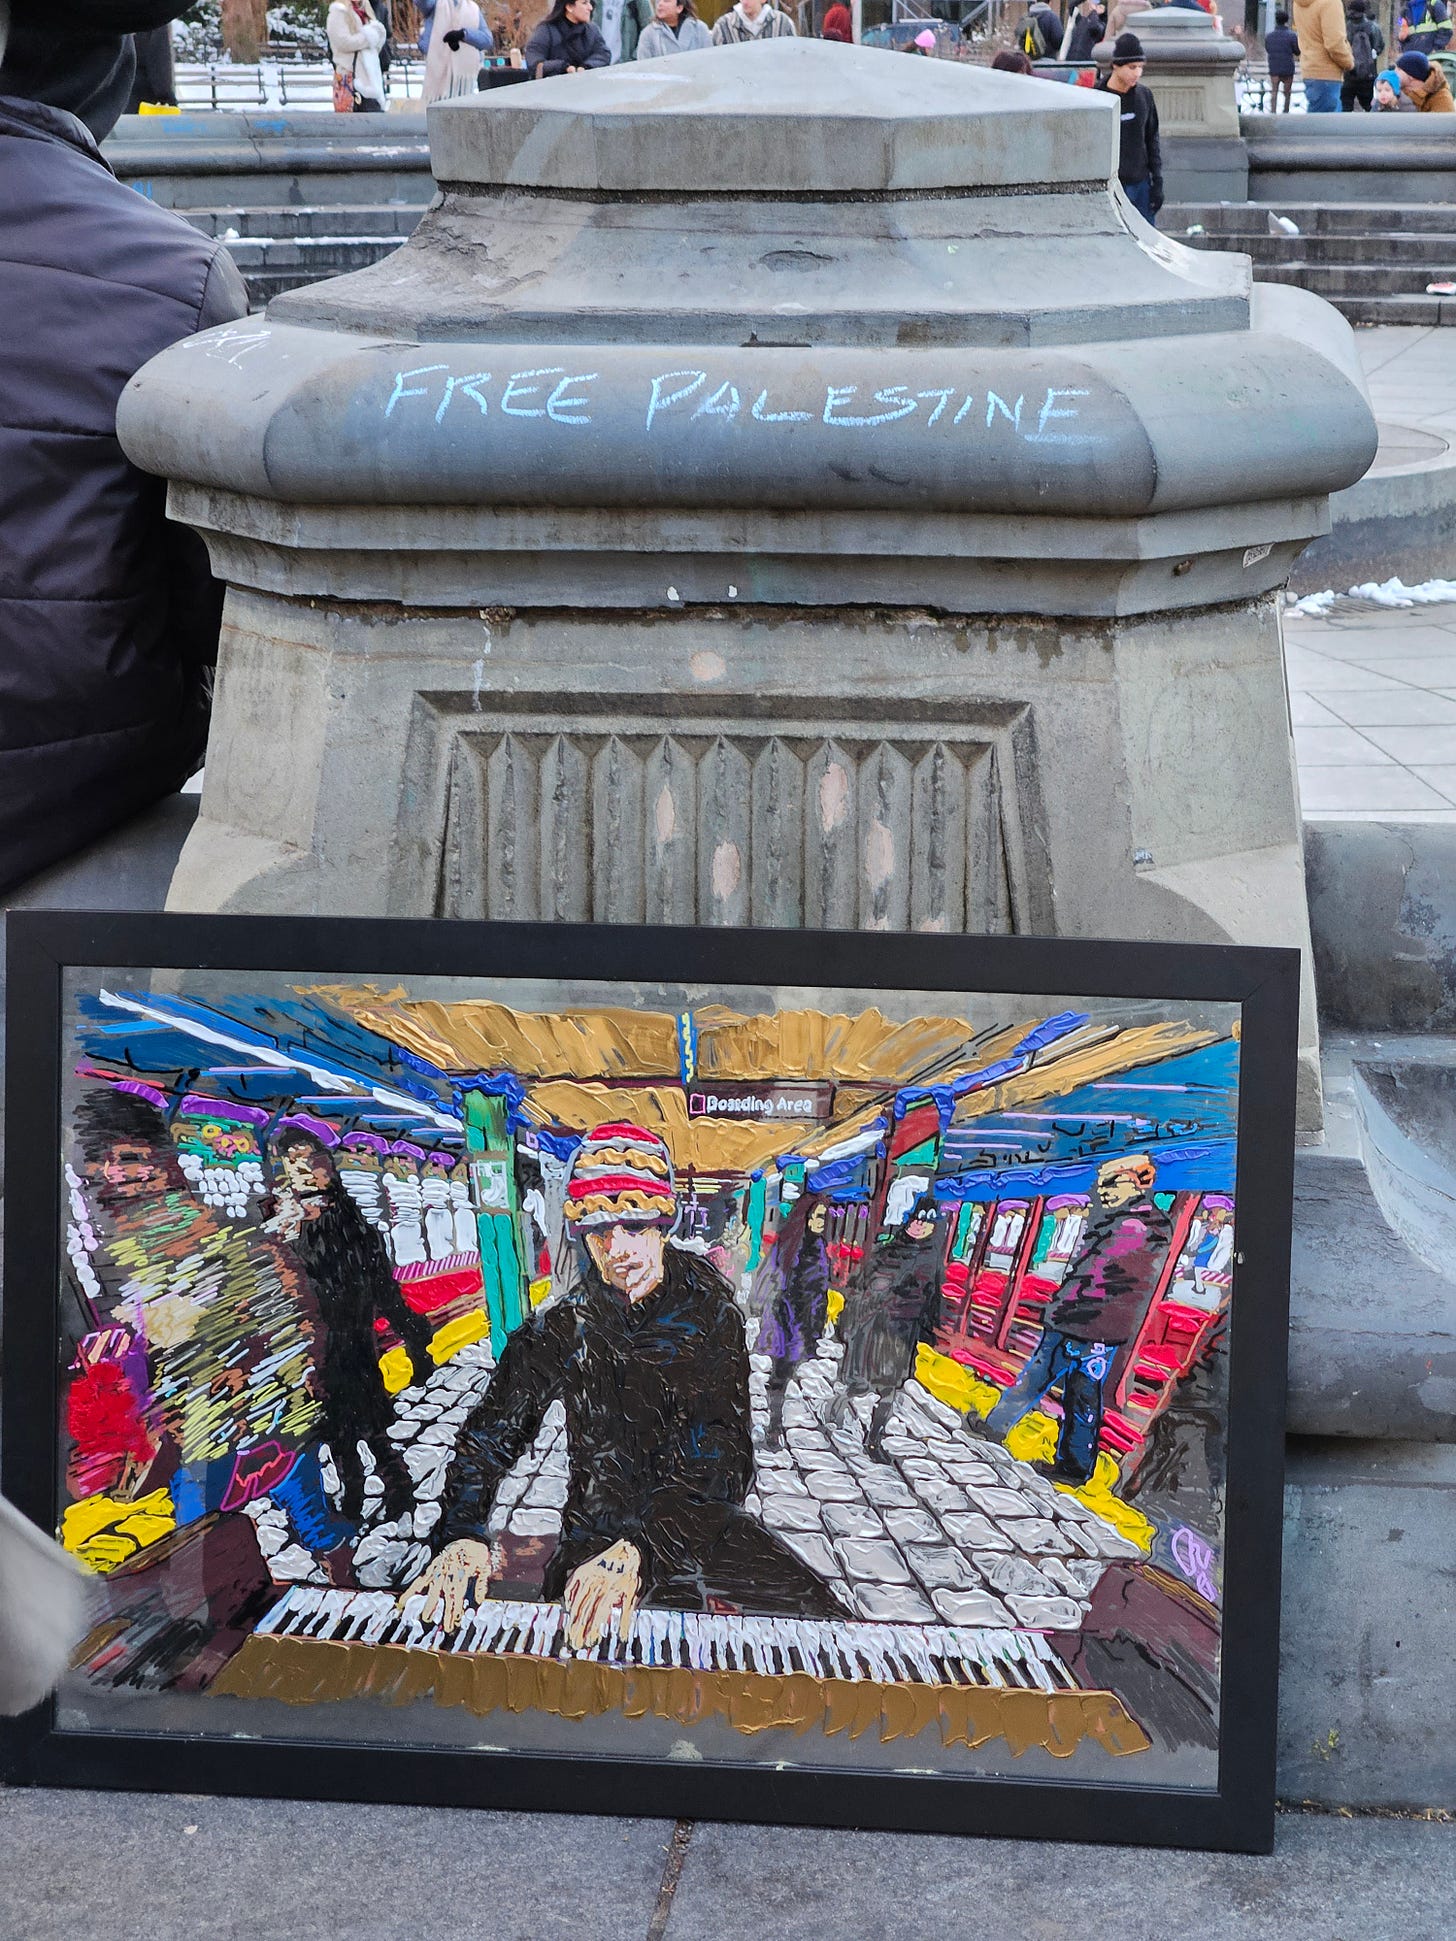 "Free Palestine" is written in blue chalk across the top of a cement pillar. A painting is leaned against the pillar that shows a colorful depiction of a pianist playing on a subway platform. 